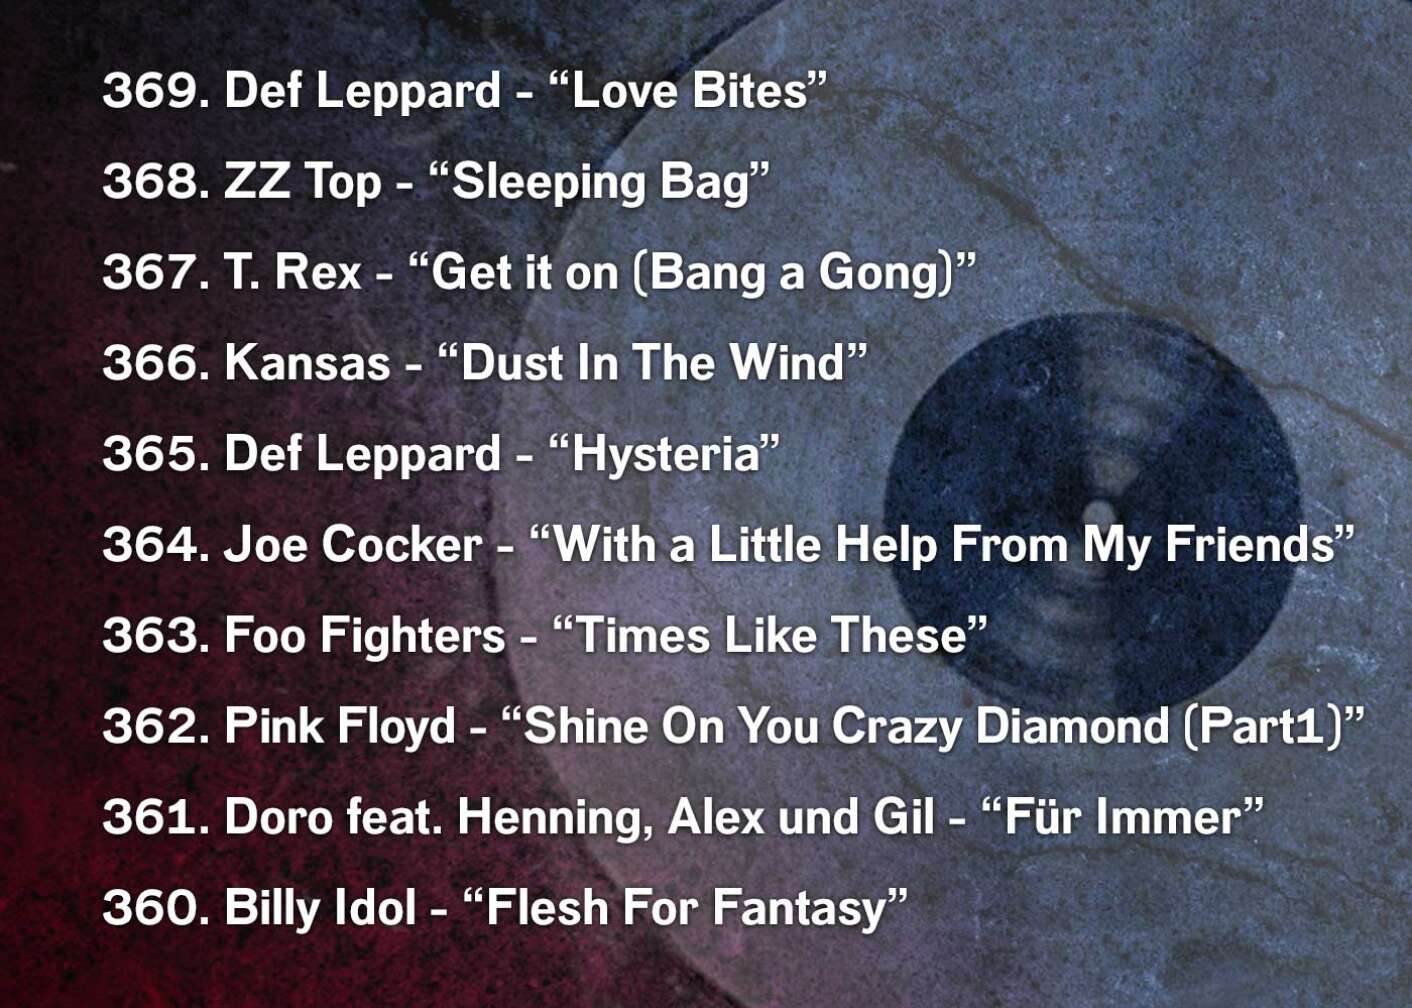 369. Def Leppard - “Love Bites” 368. ZZ Top - “Sleeping Bag” 367. T. Rex - “Get it on (Bang a Gong)” 366. Kansas - “Dust In The Wind” 365. Def Leppard - “Hysteria” 364. Joe Cocker - “With a Little Help From My Friends” 363. Foo Fighters - “Times Like These” 362. Pink Floyd - “Shine On You Crazy Diamond (Part1)” 361. Doro feat. Henning, Alex und Gil - “Für Immer” 360. Billy Idol - “Flesh For Fantasy”